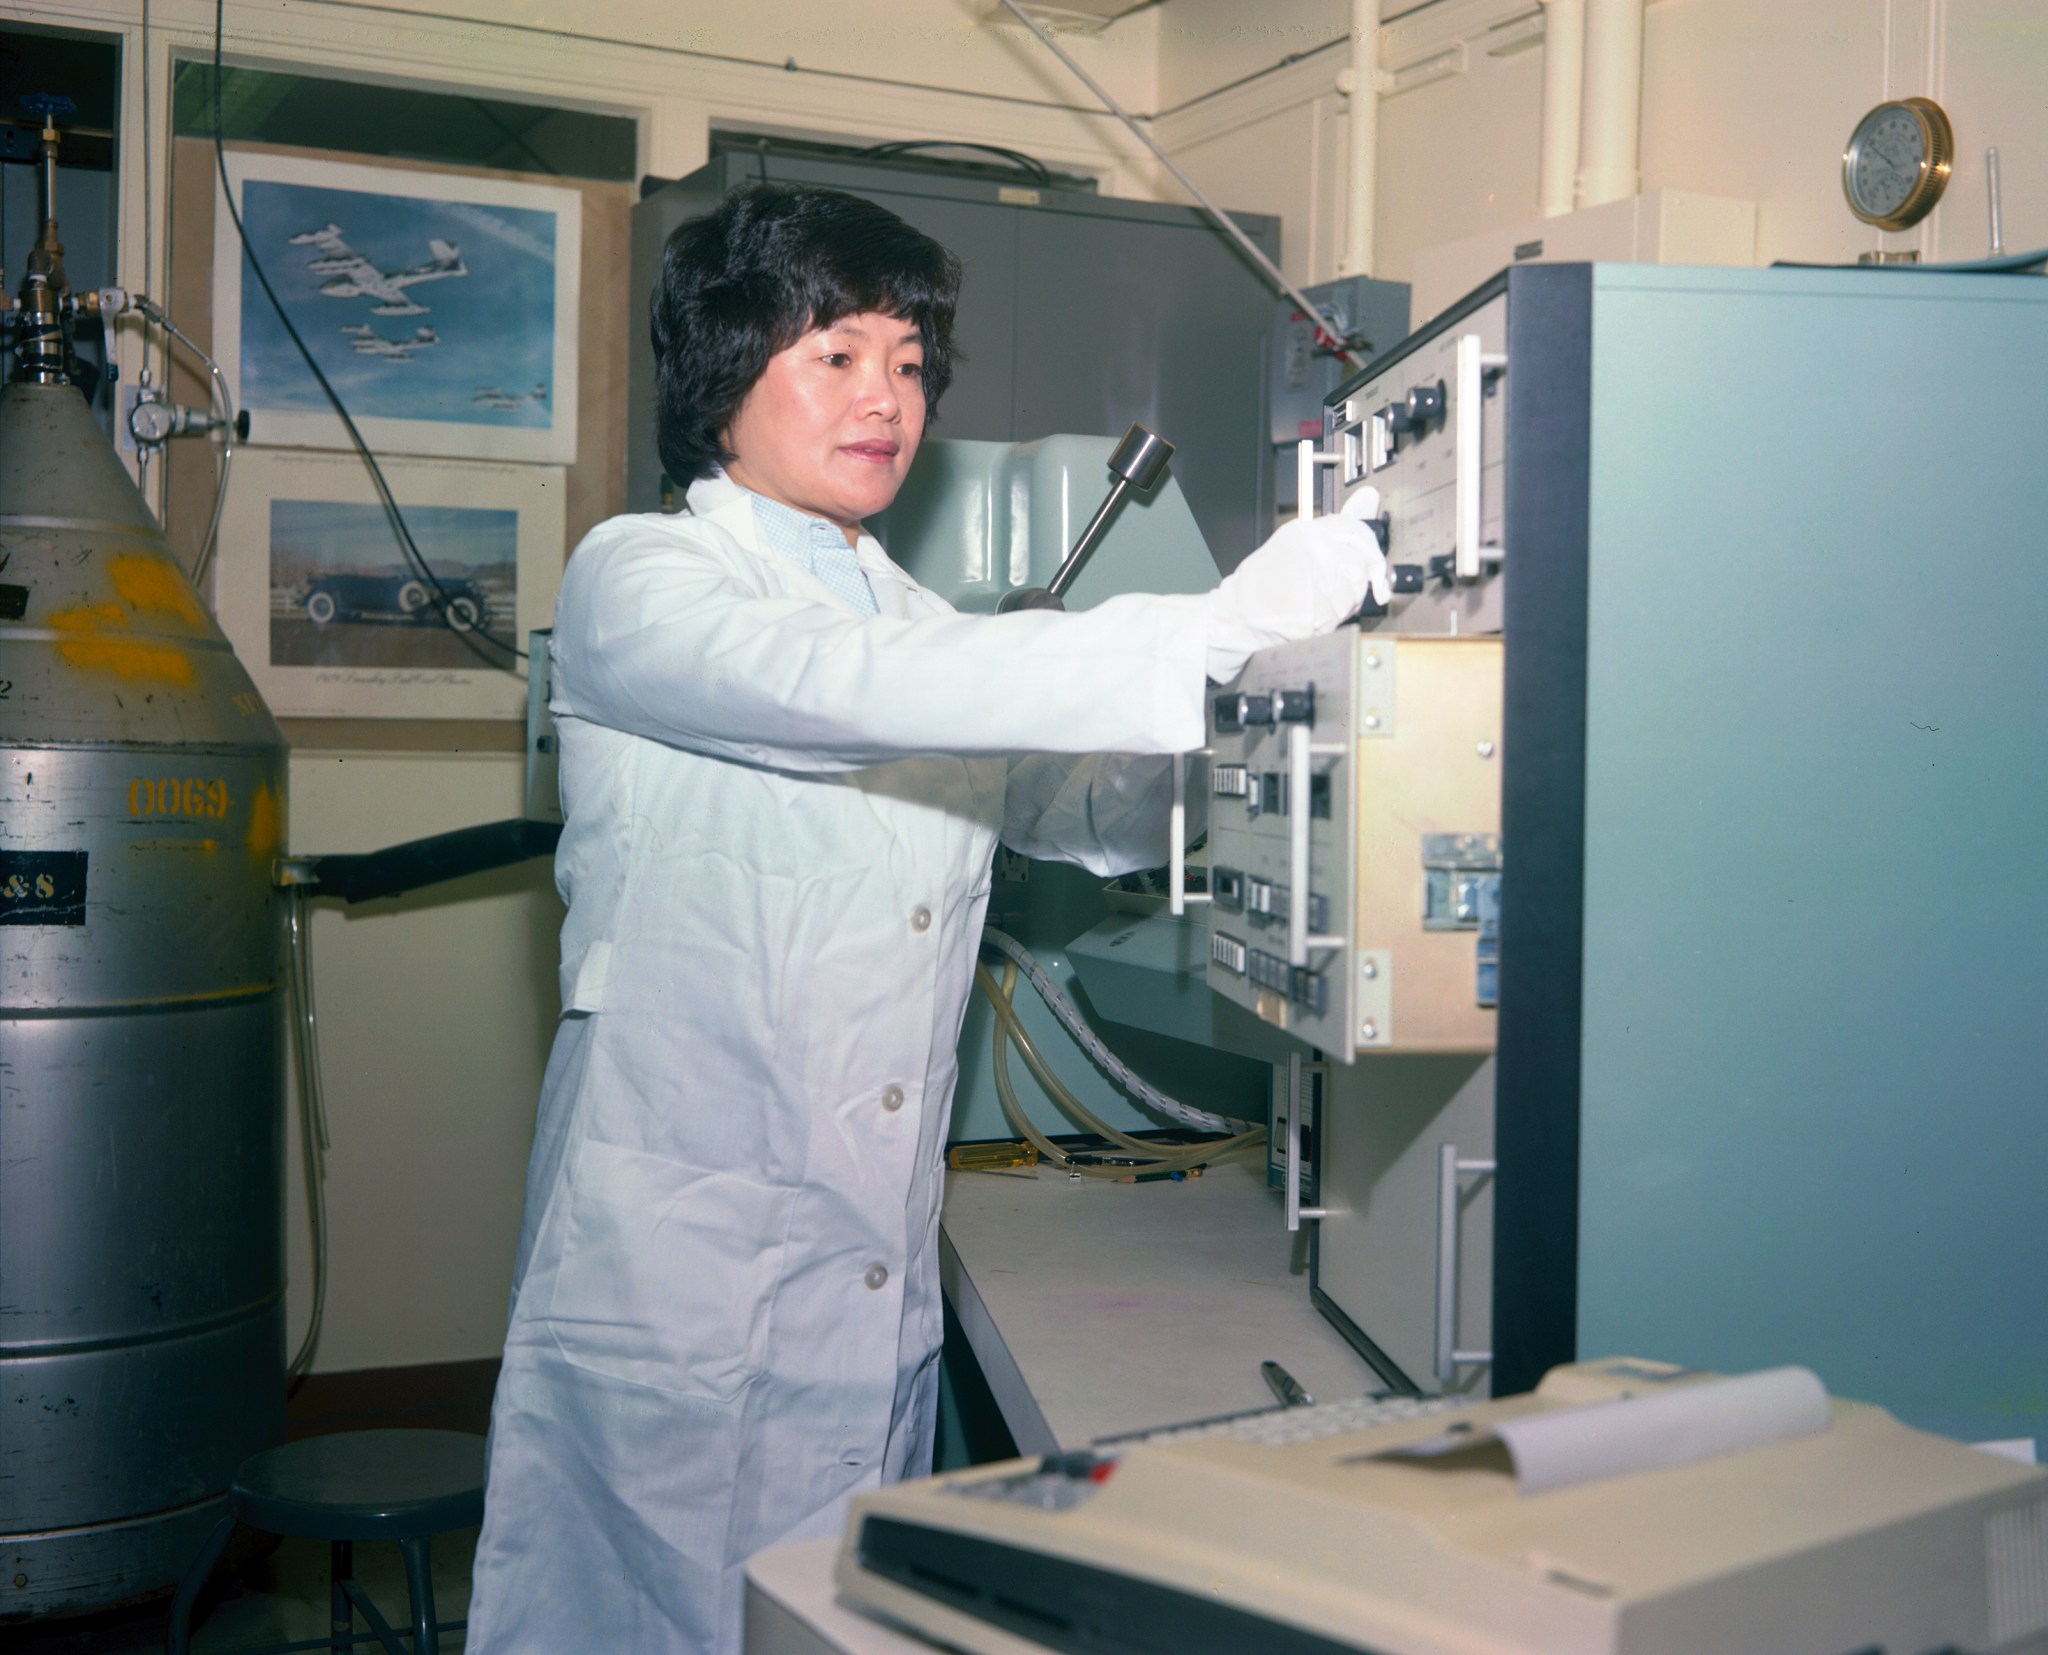 Asian-American scientist in lab coat works in a laboratory at NASA.